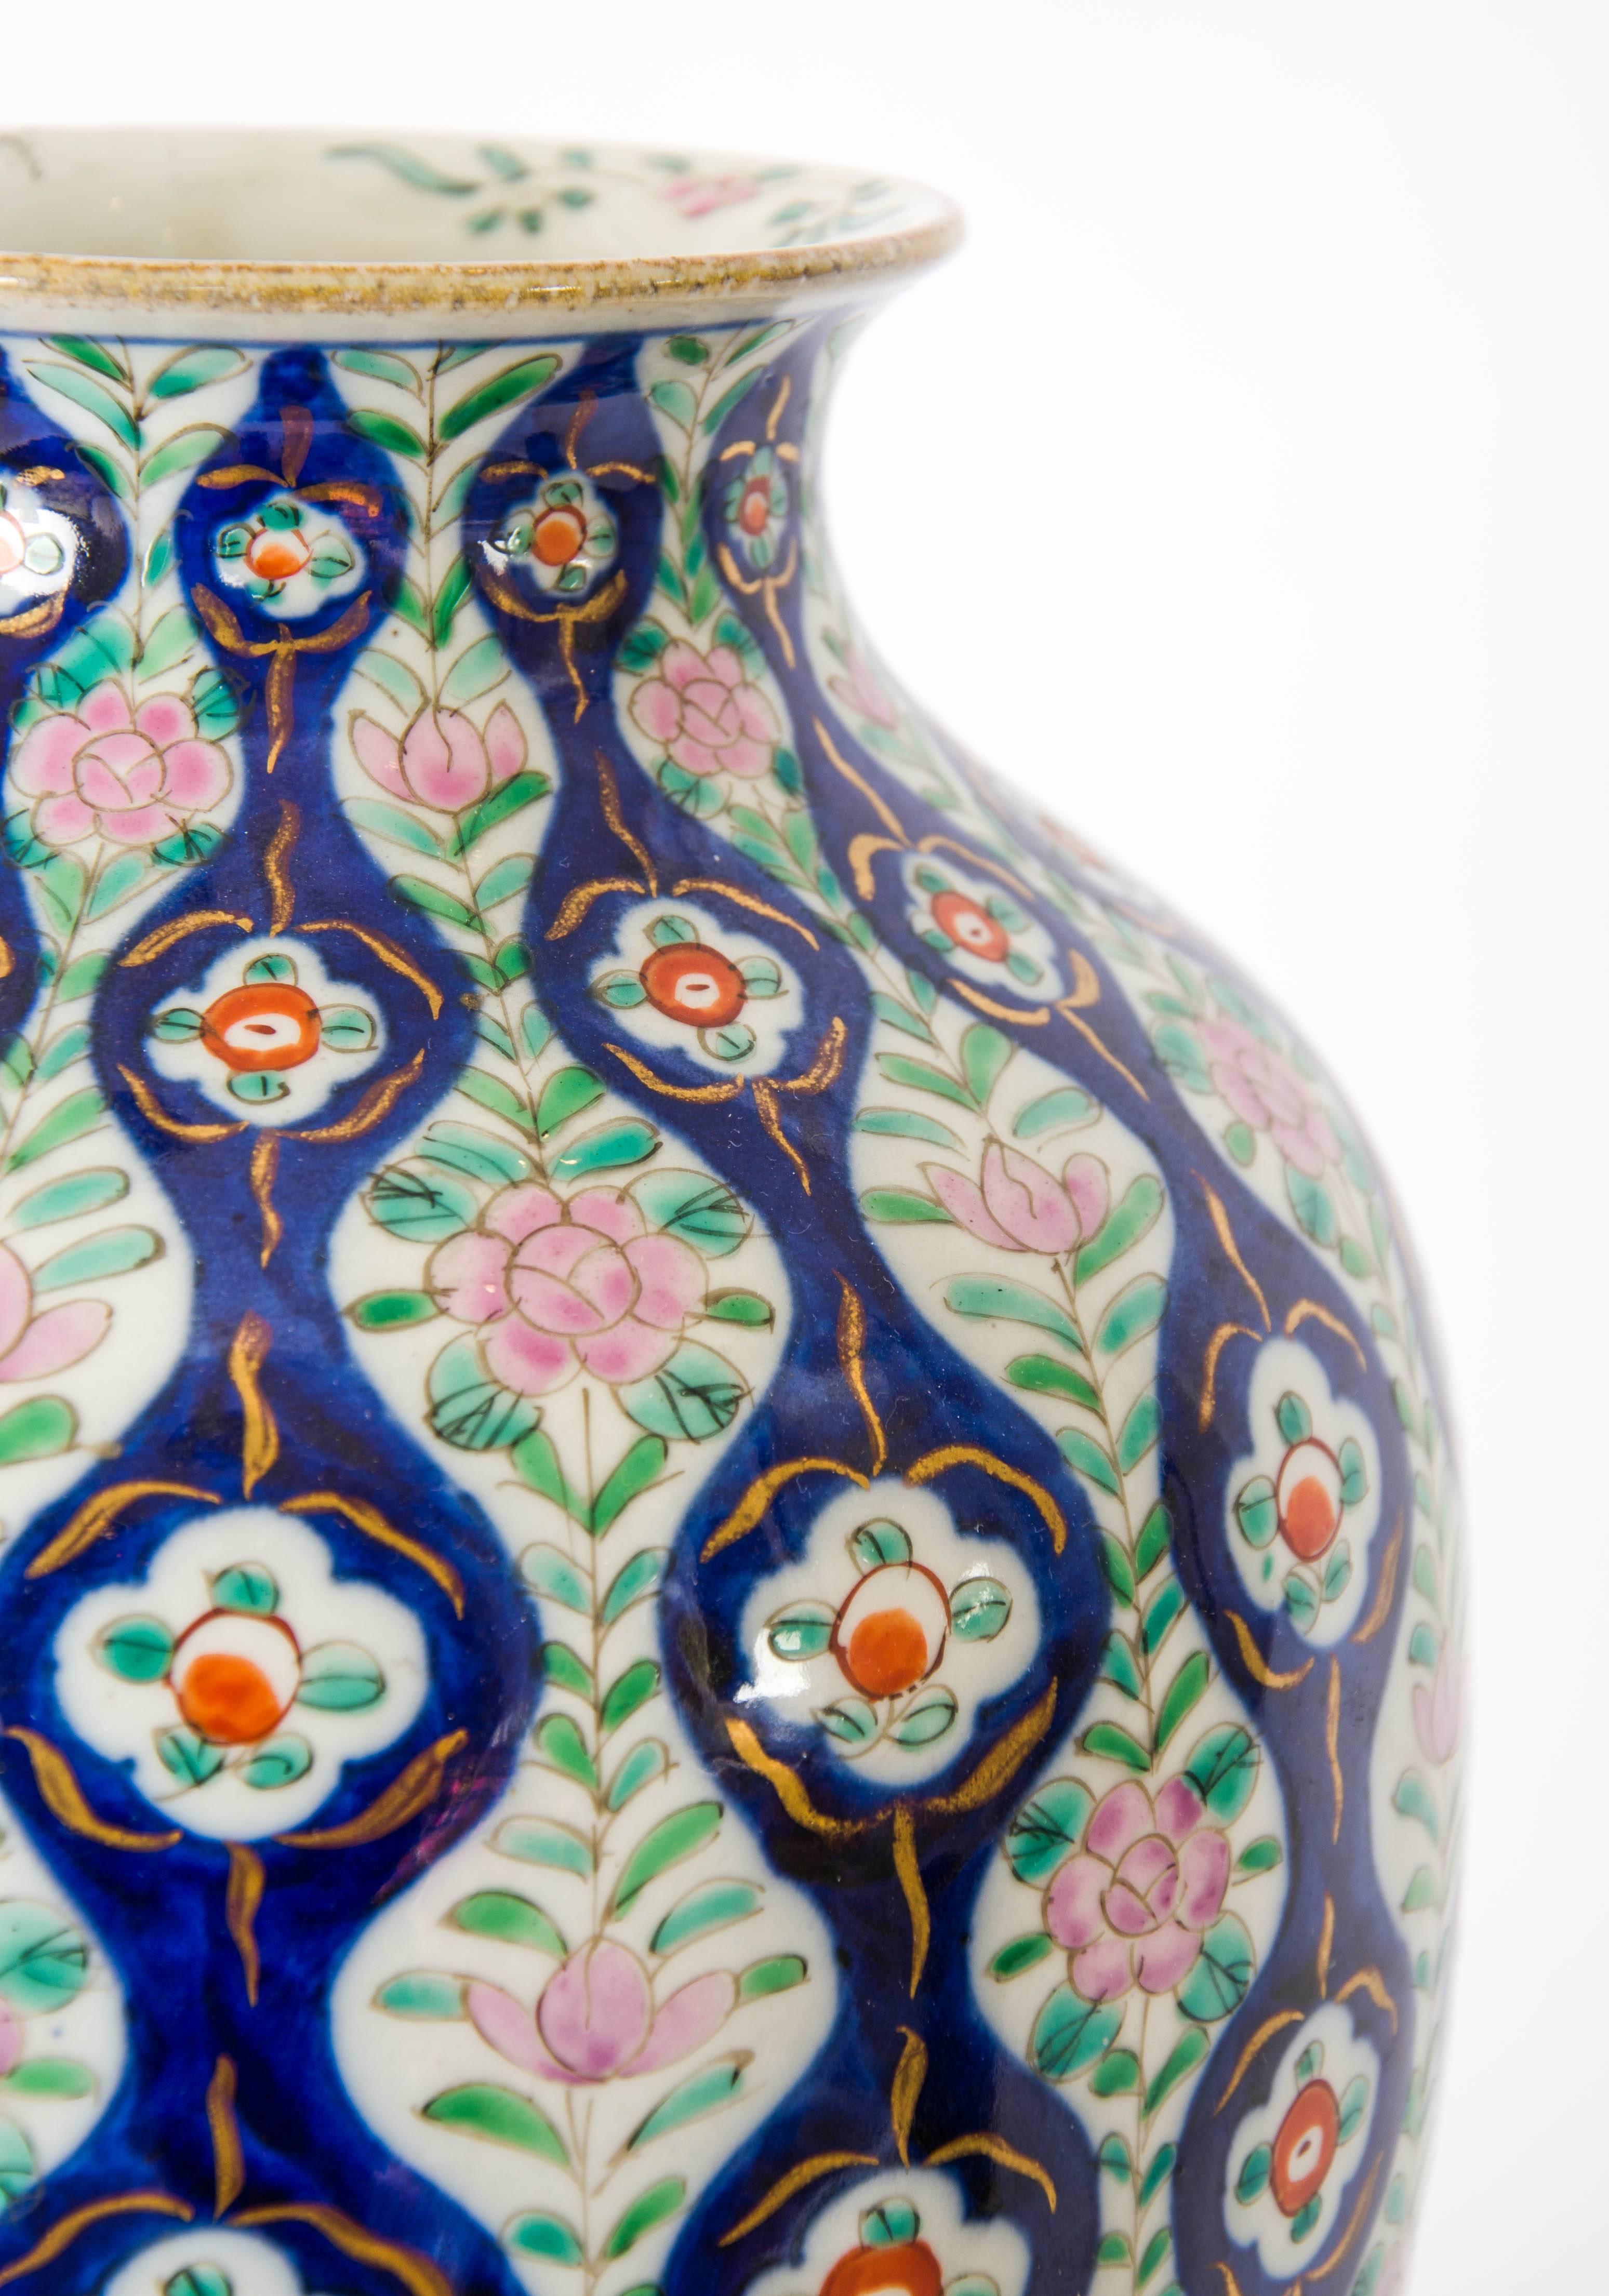 A late 19th century Chinese vase in blues, greens and reds